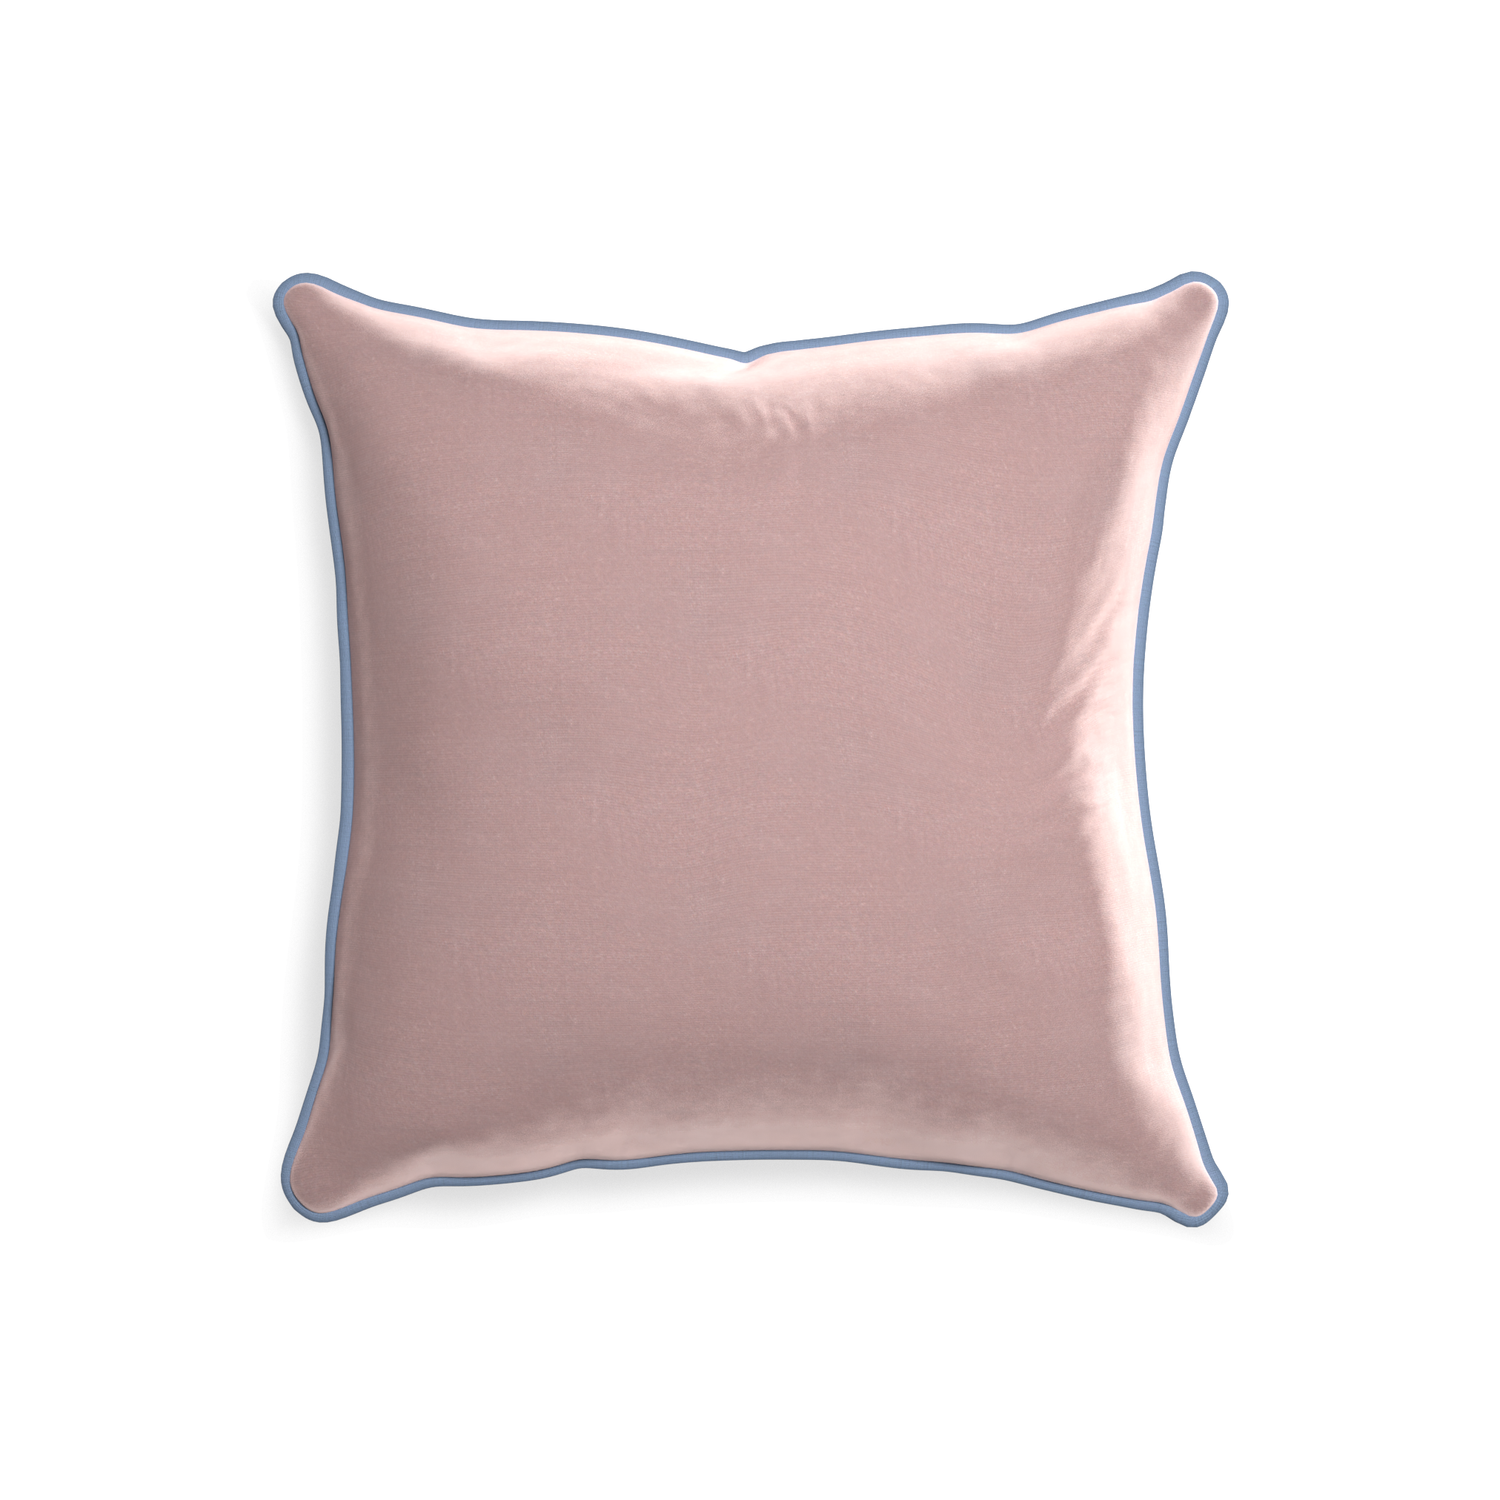 square mauve velvet pillow with sky blue piping